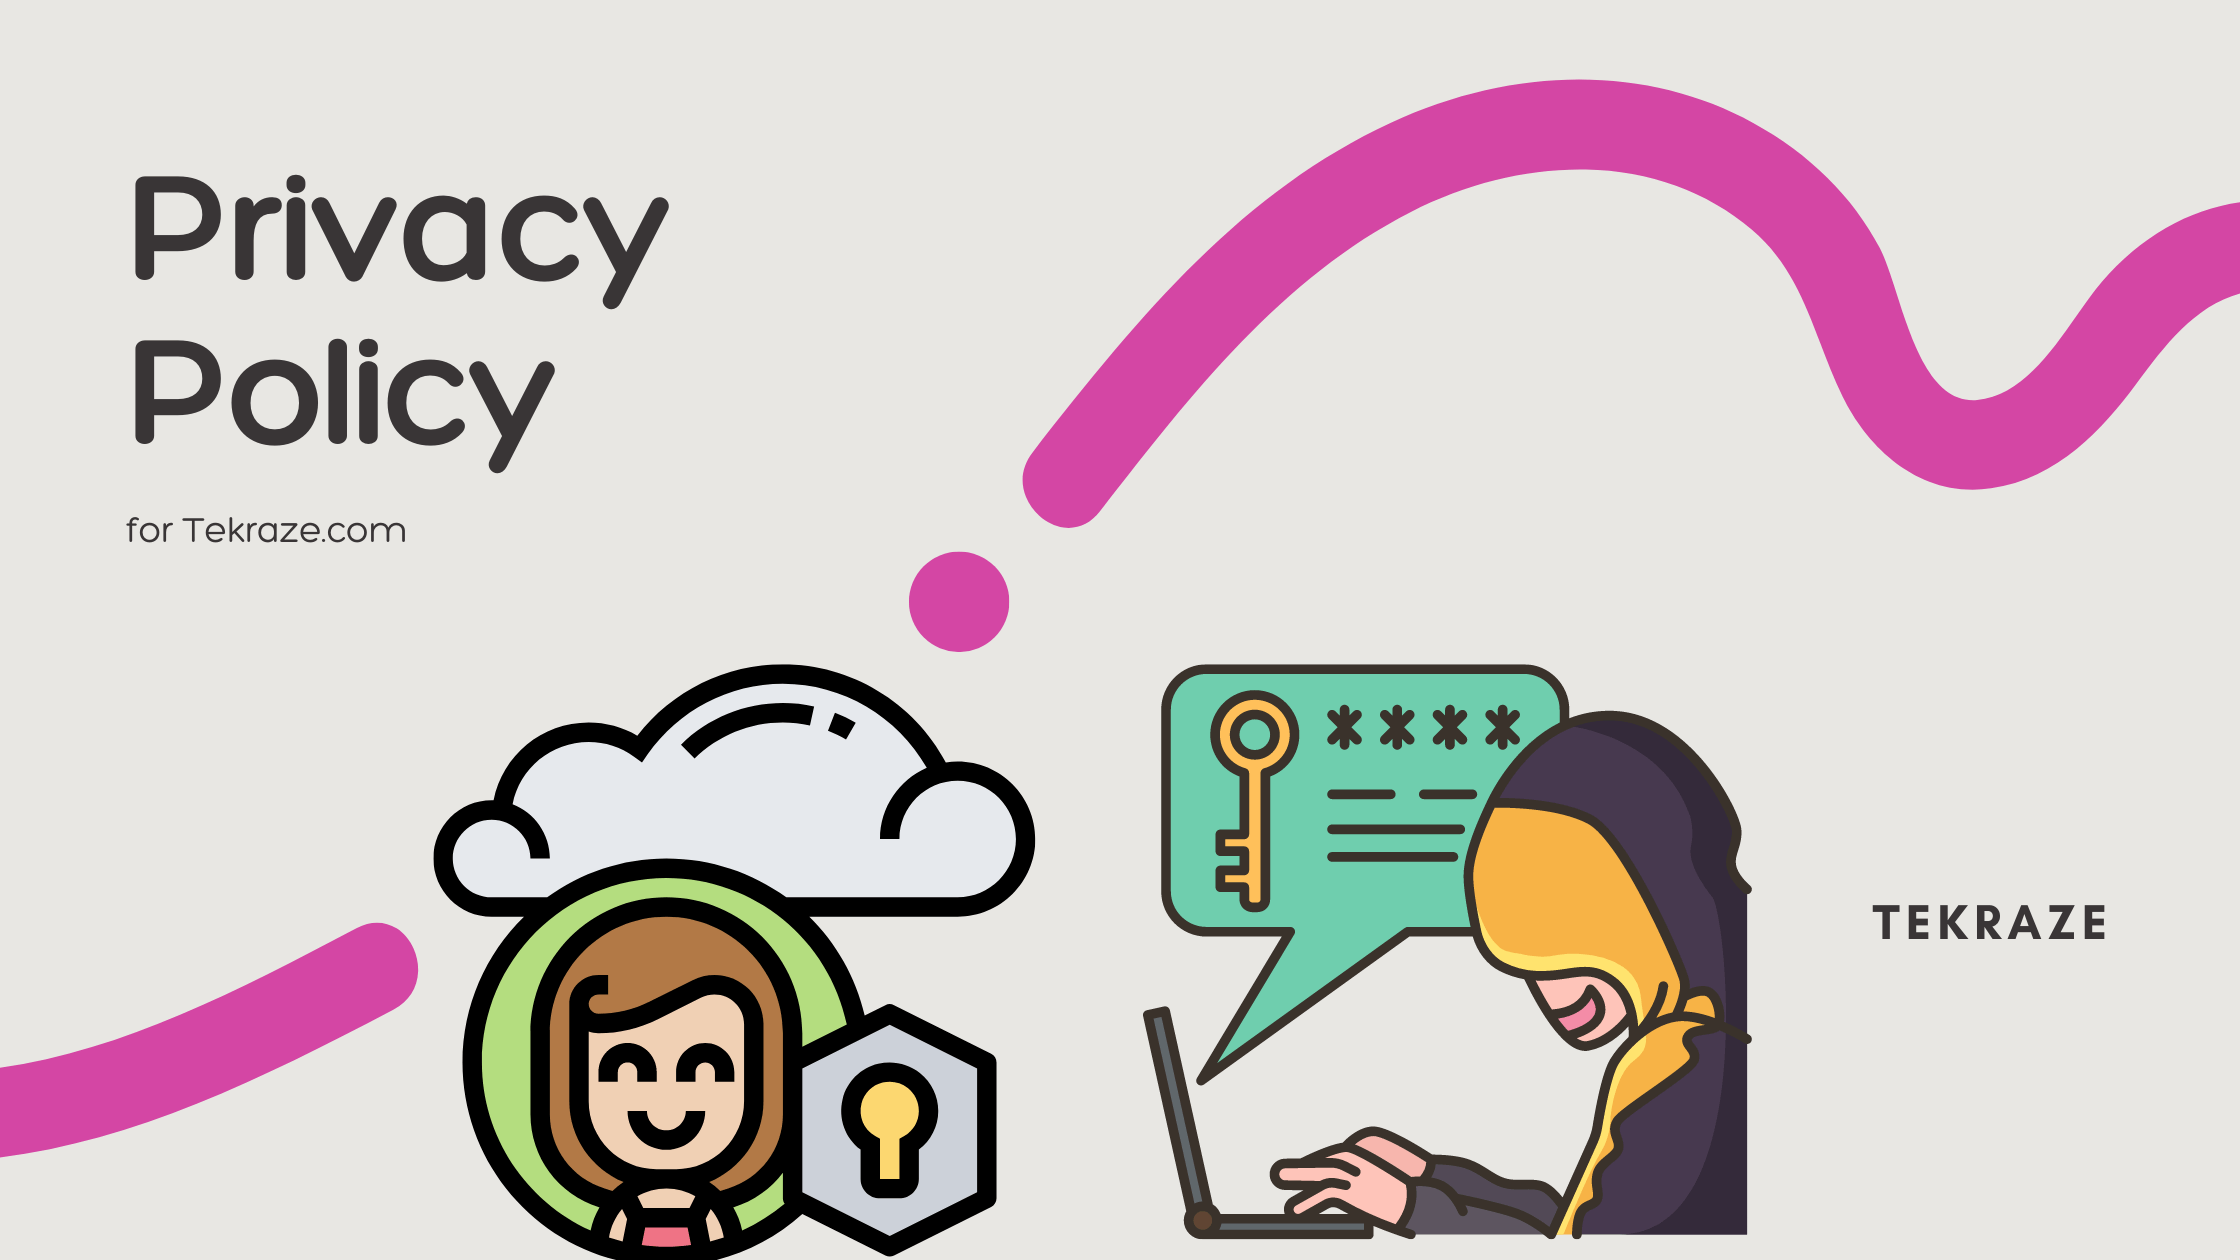 Image representing Privacy Policy Banner for Tekraze.com blog